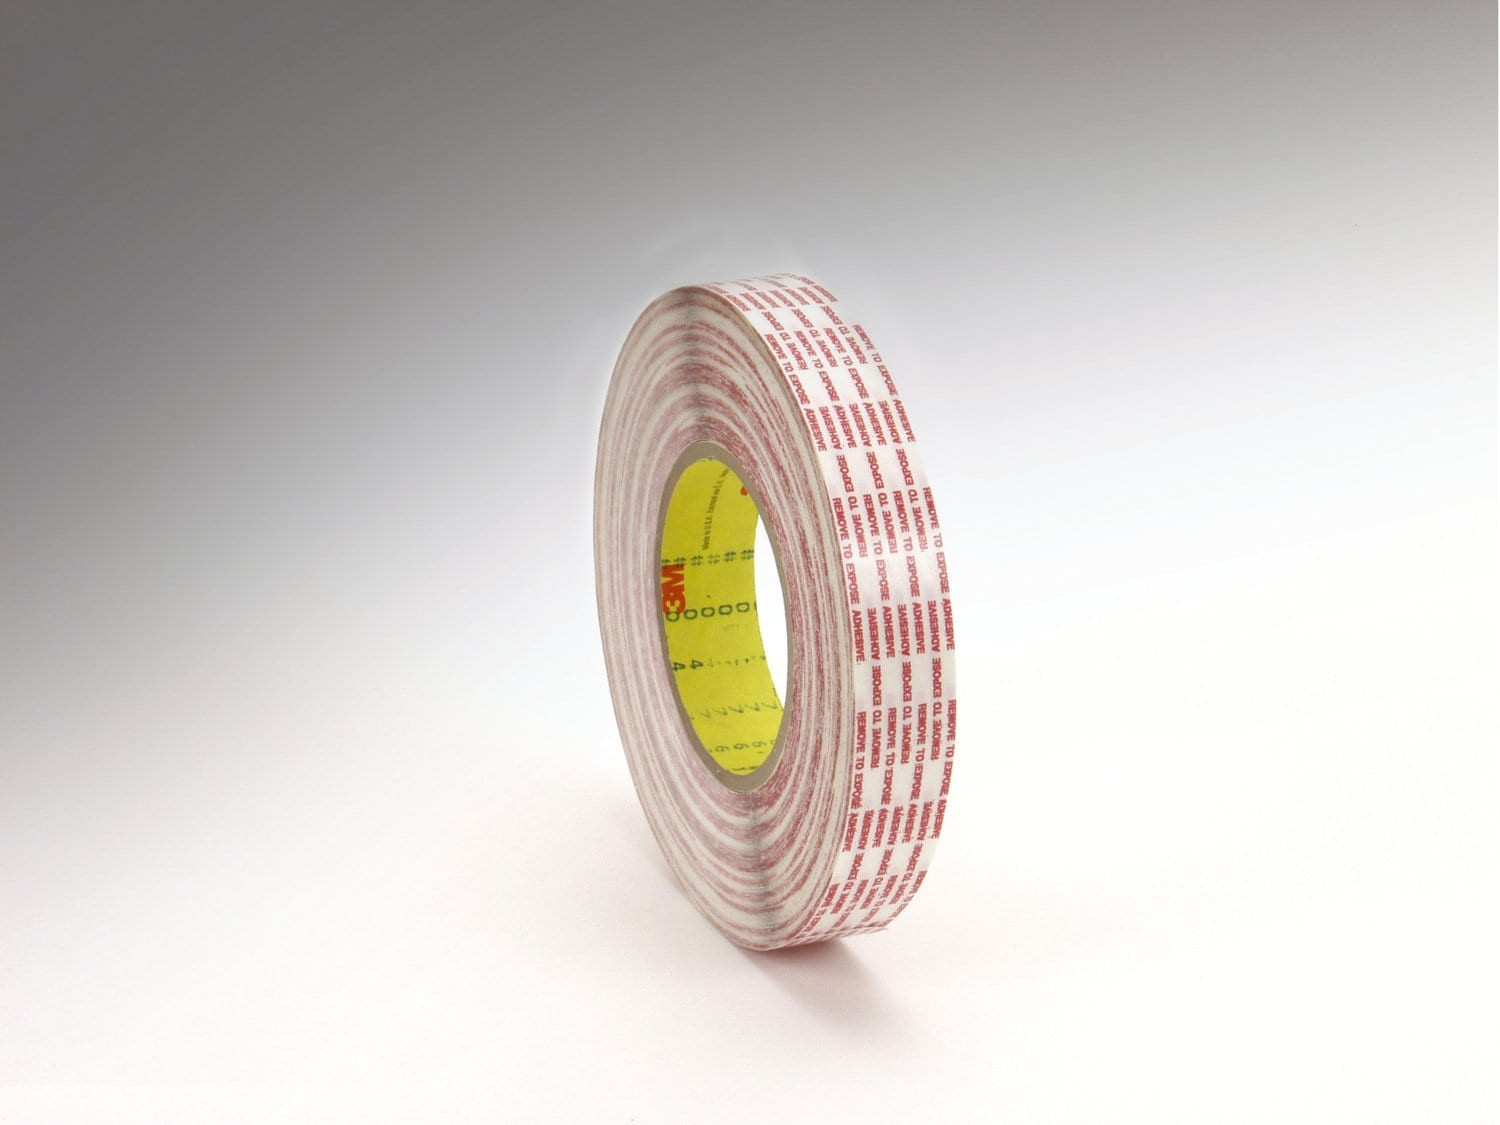 7010374001 - 3M Double Coated Tape Extended Liner 476XL, Translucent, 2 in x 540 yd,
6 mil, 3 rolls per case